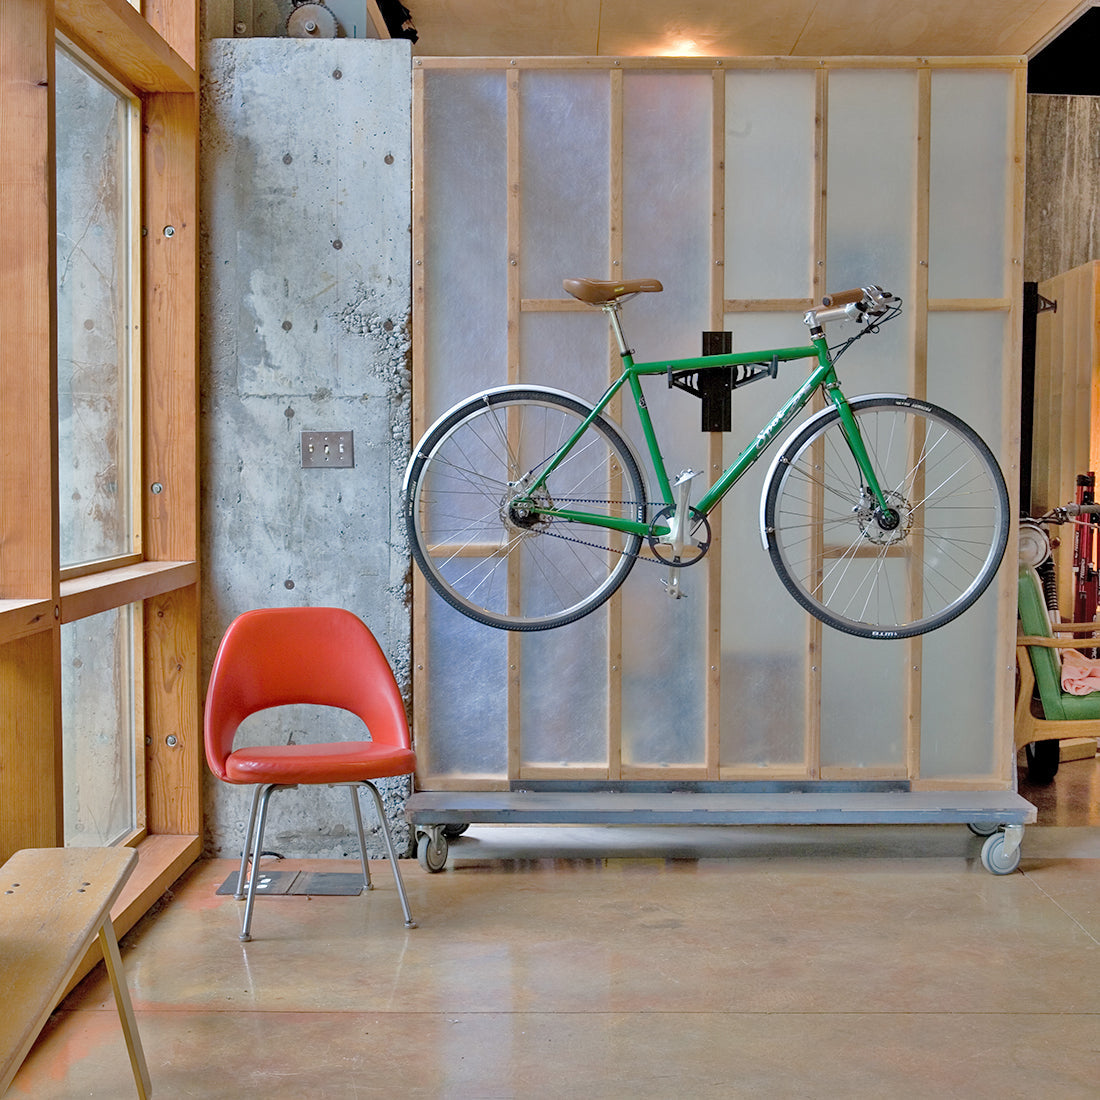 Green town bike suspended on bike cradle arms attached to 2x4 interior stud wall.